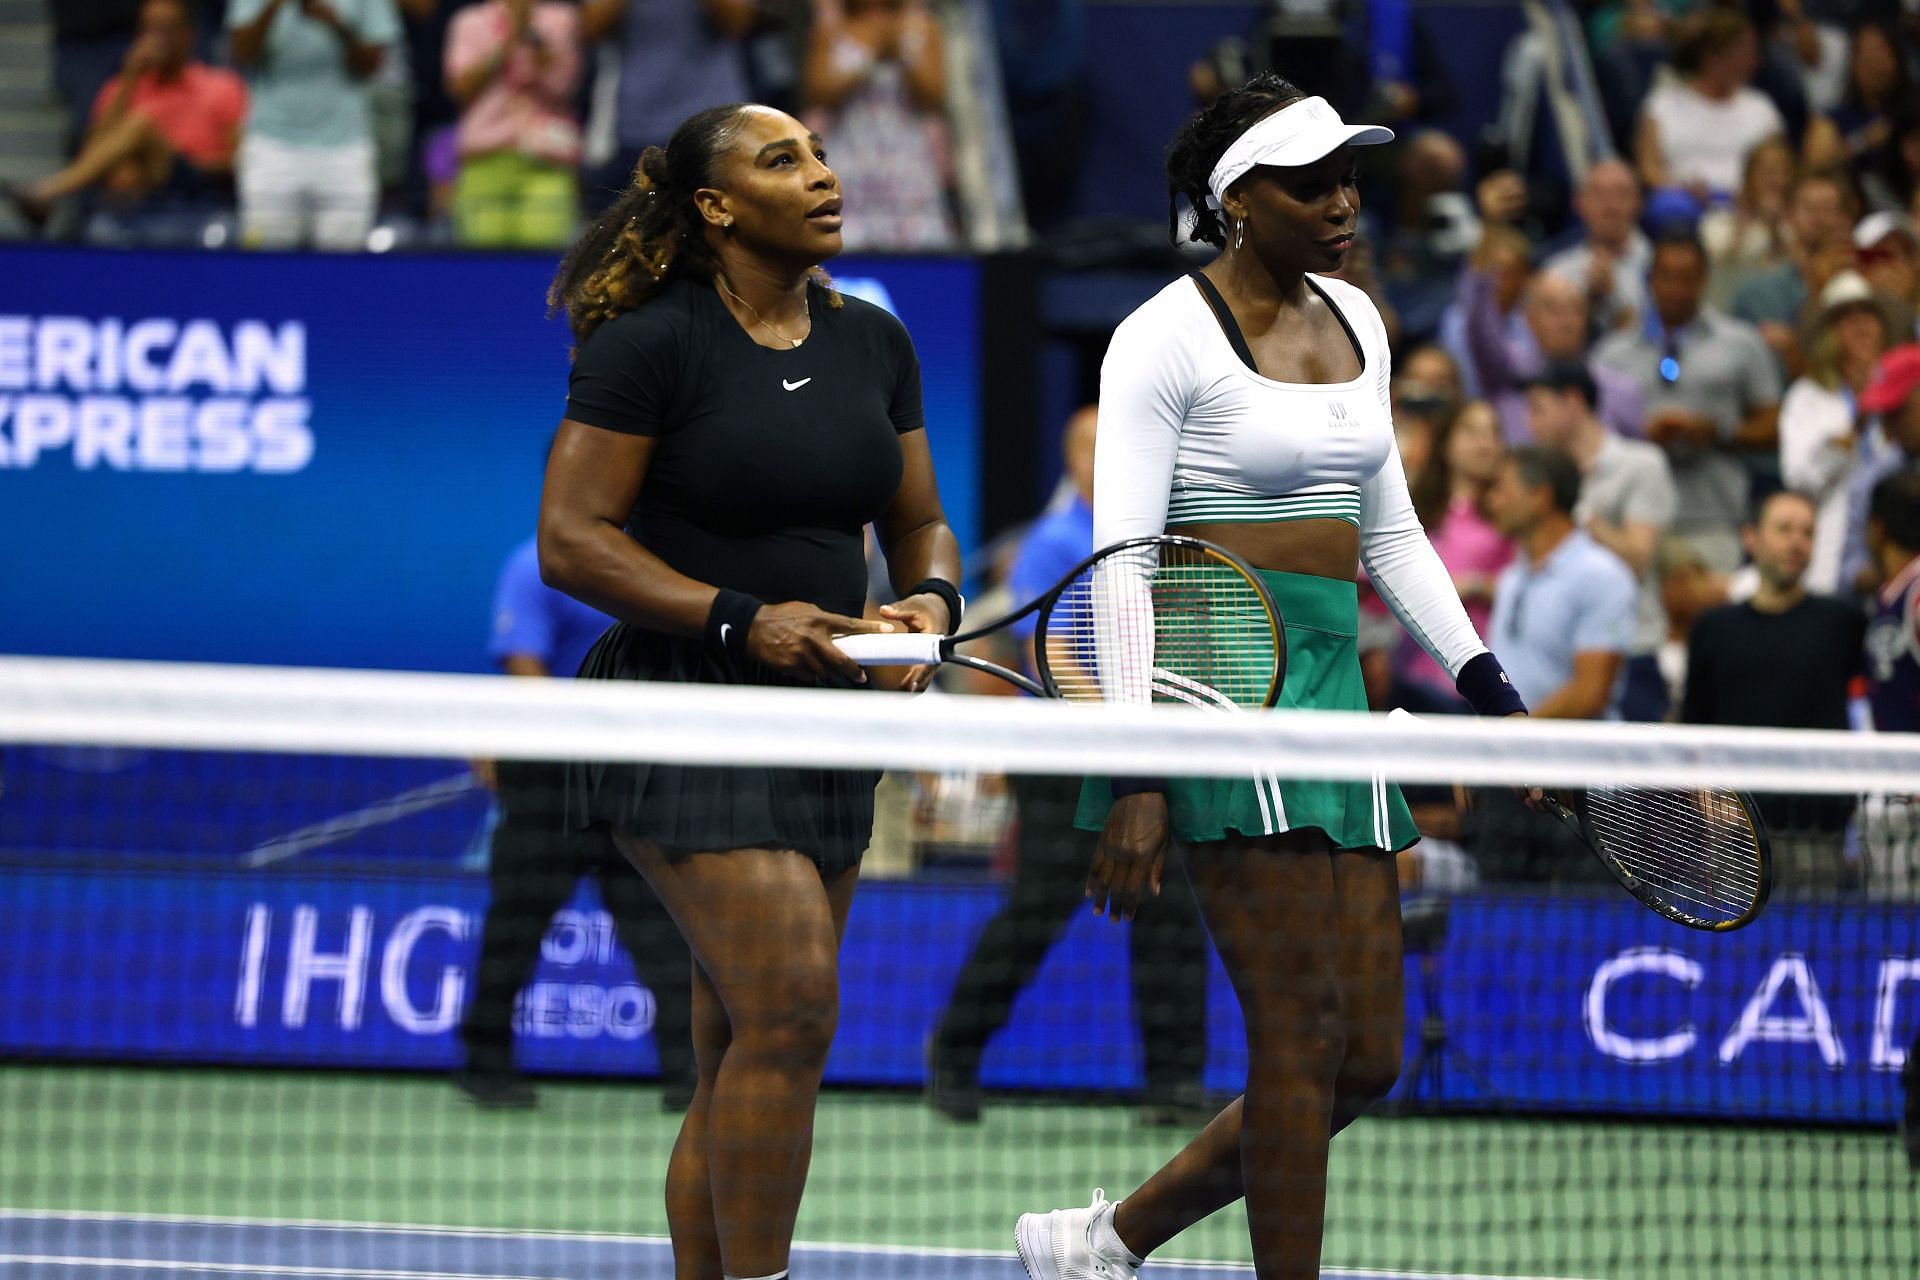 Venus Williams and Serena Williams in action at the 2022 US Open.